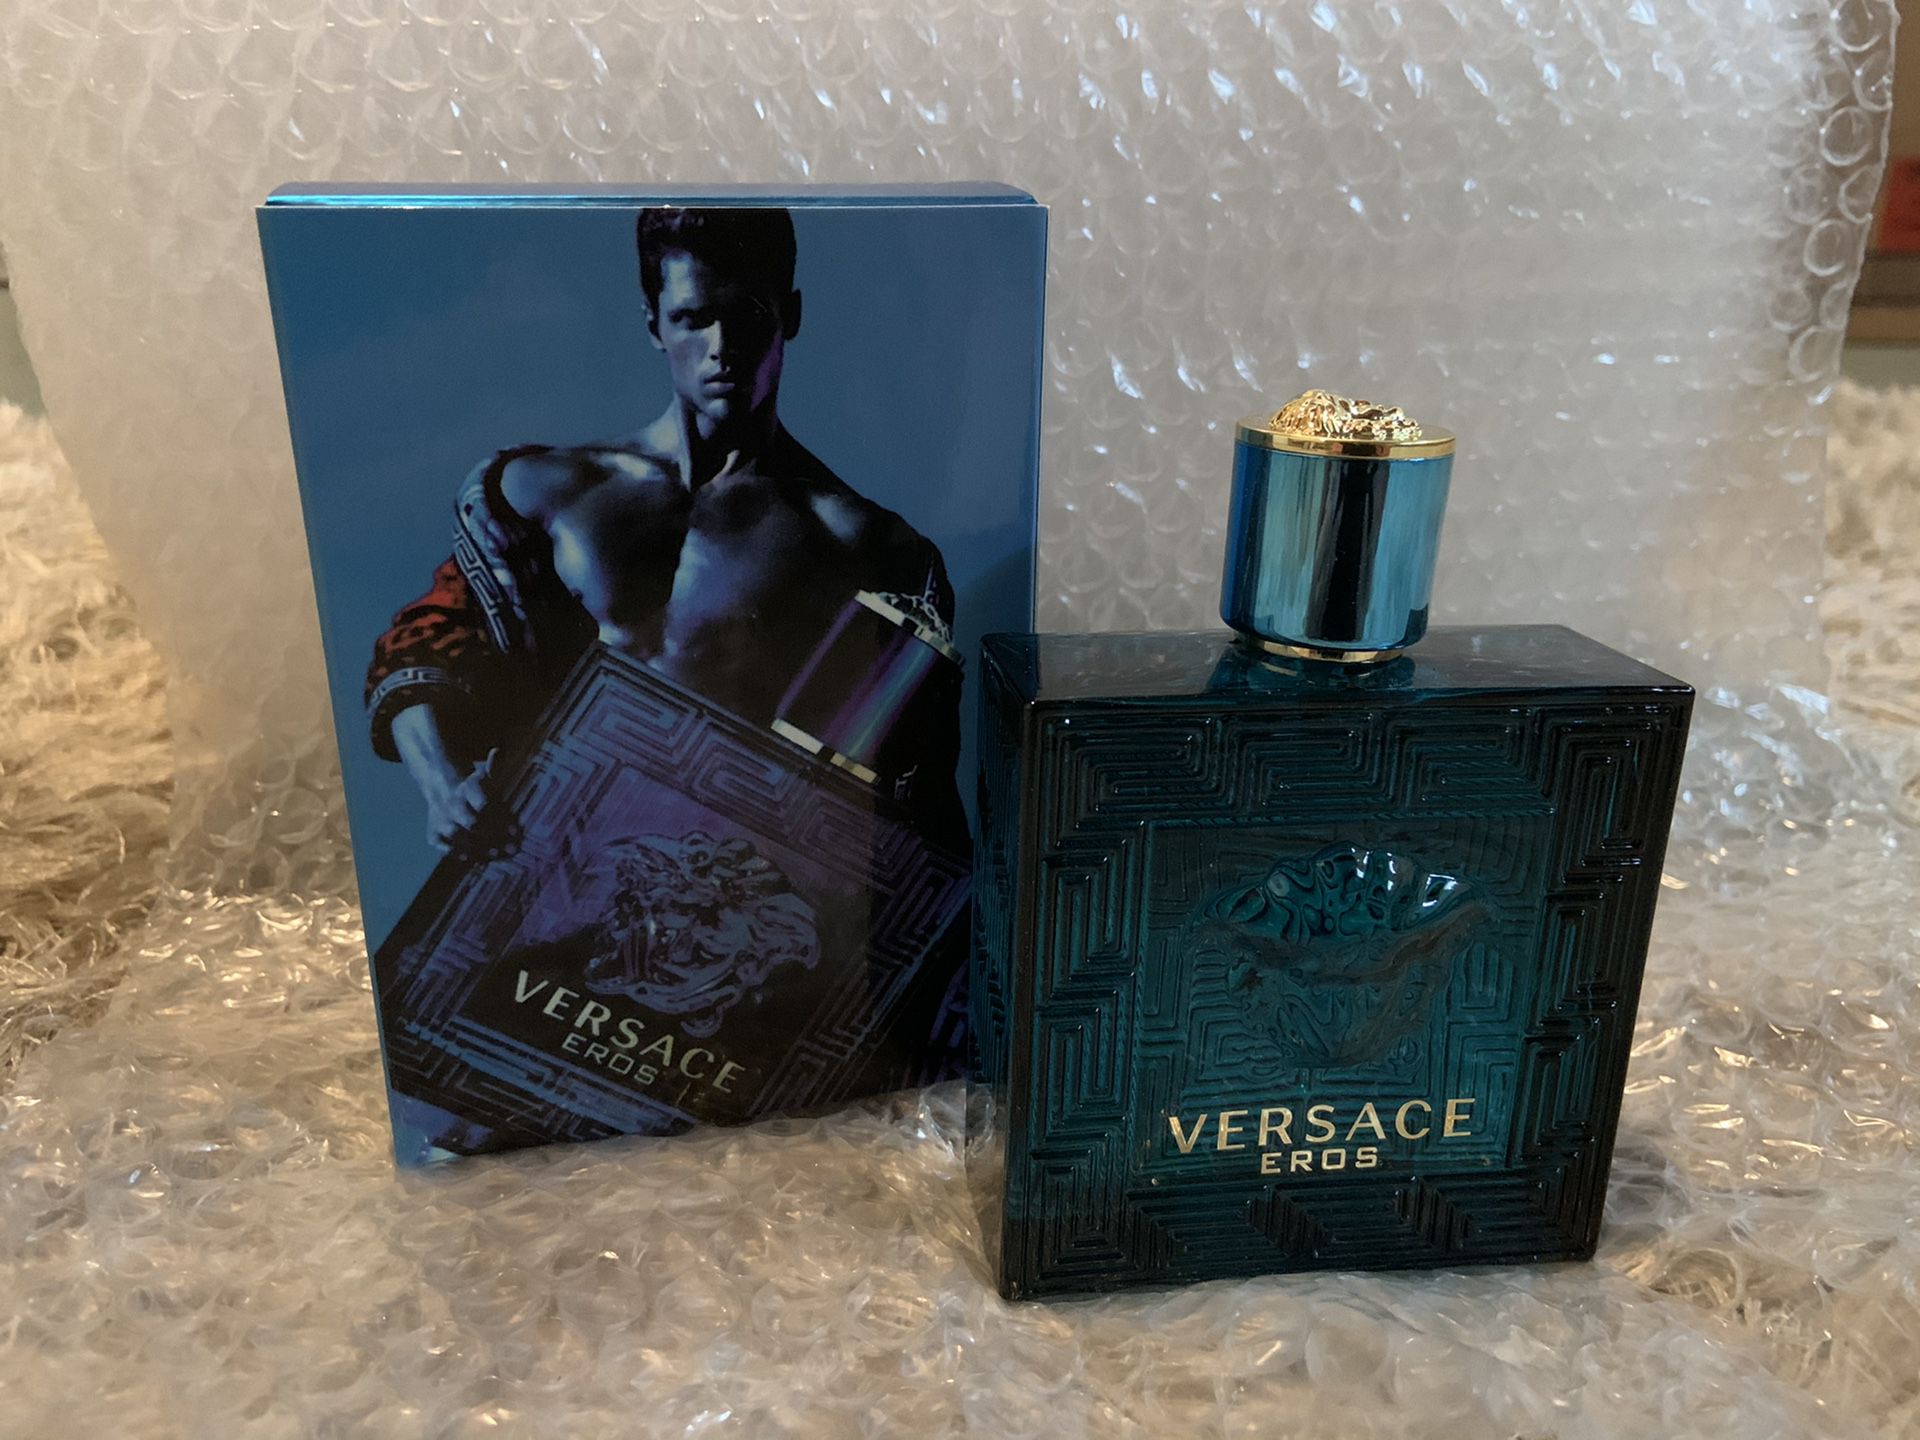 Two bottle Coco Chanel and Versace Eros